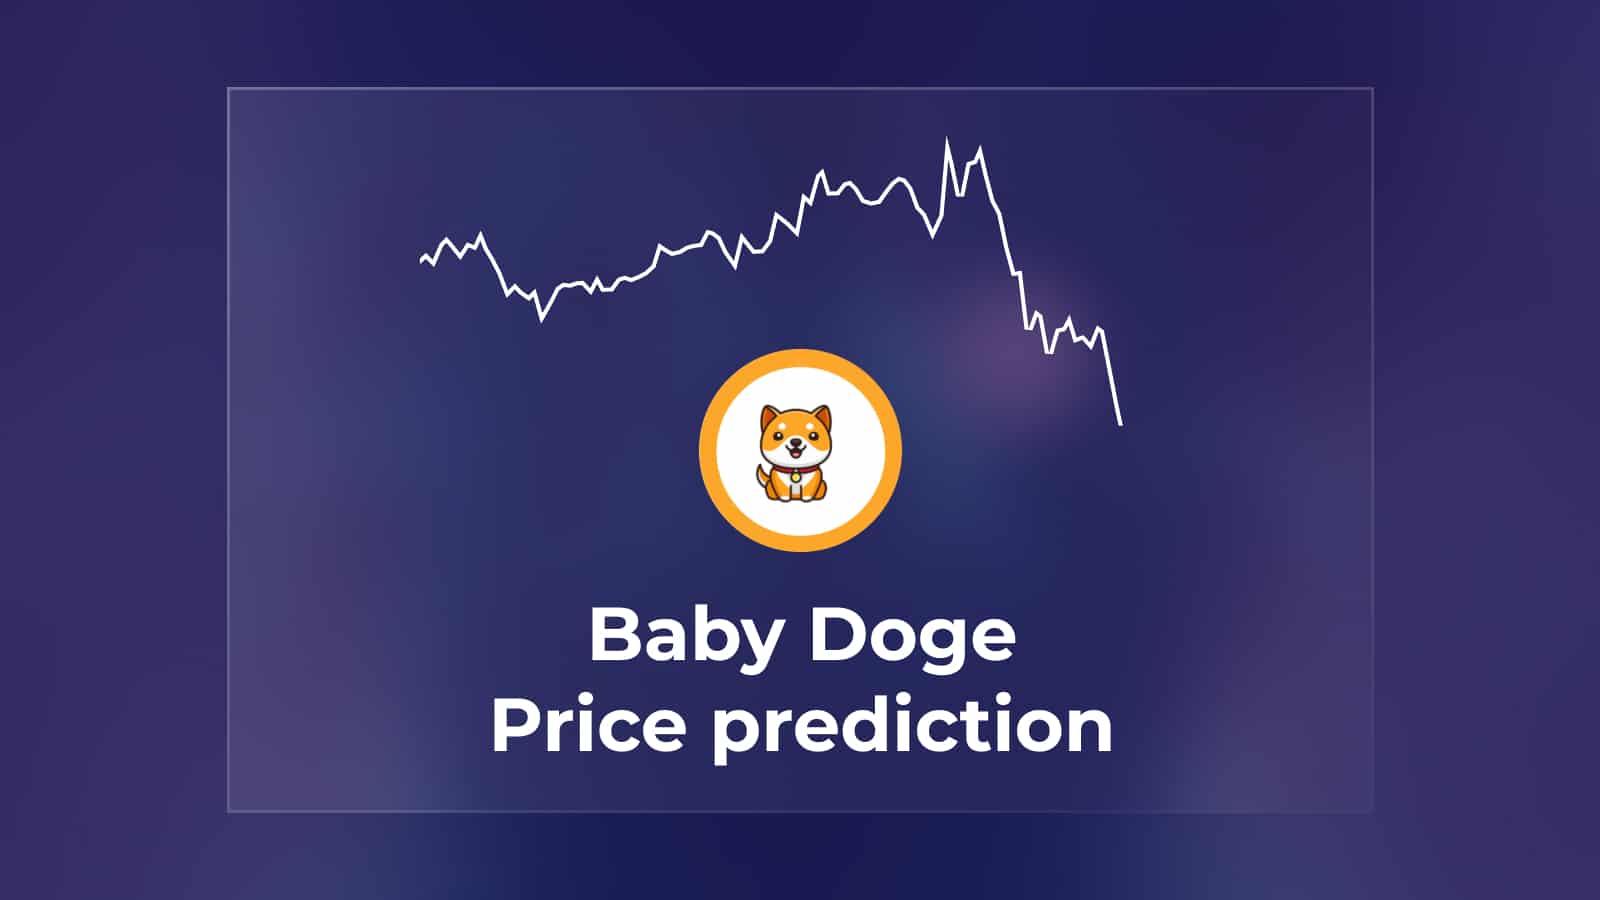 Baby Doge Price Prediction Featured Image